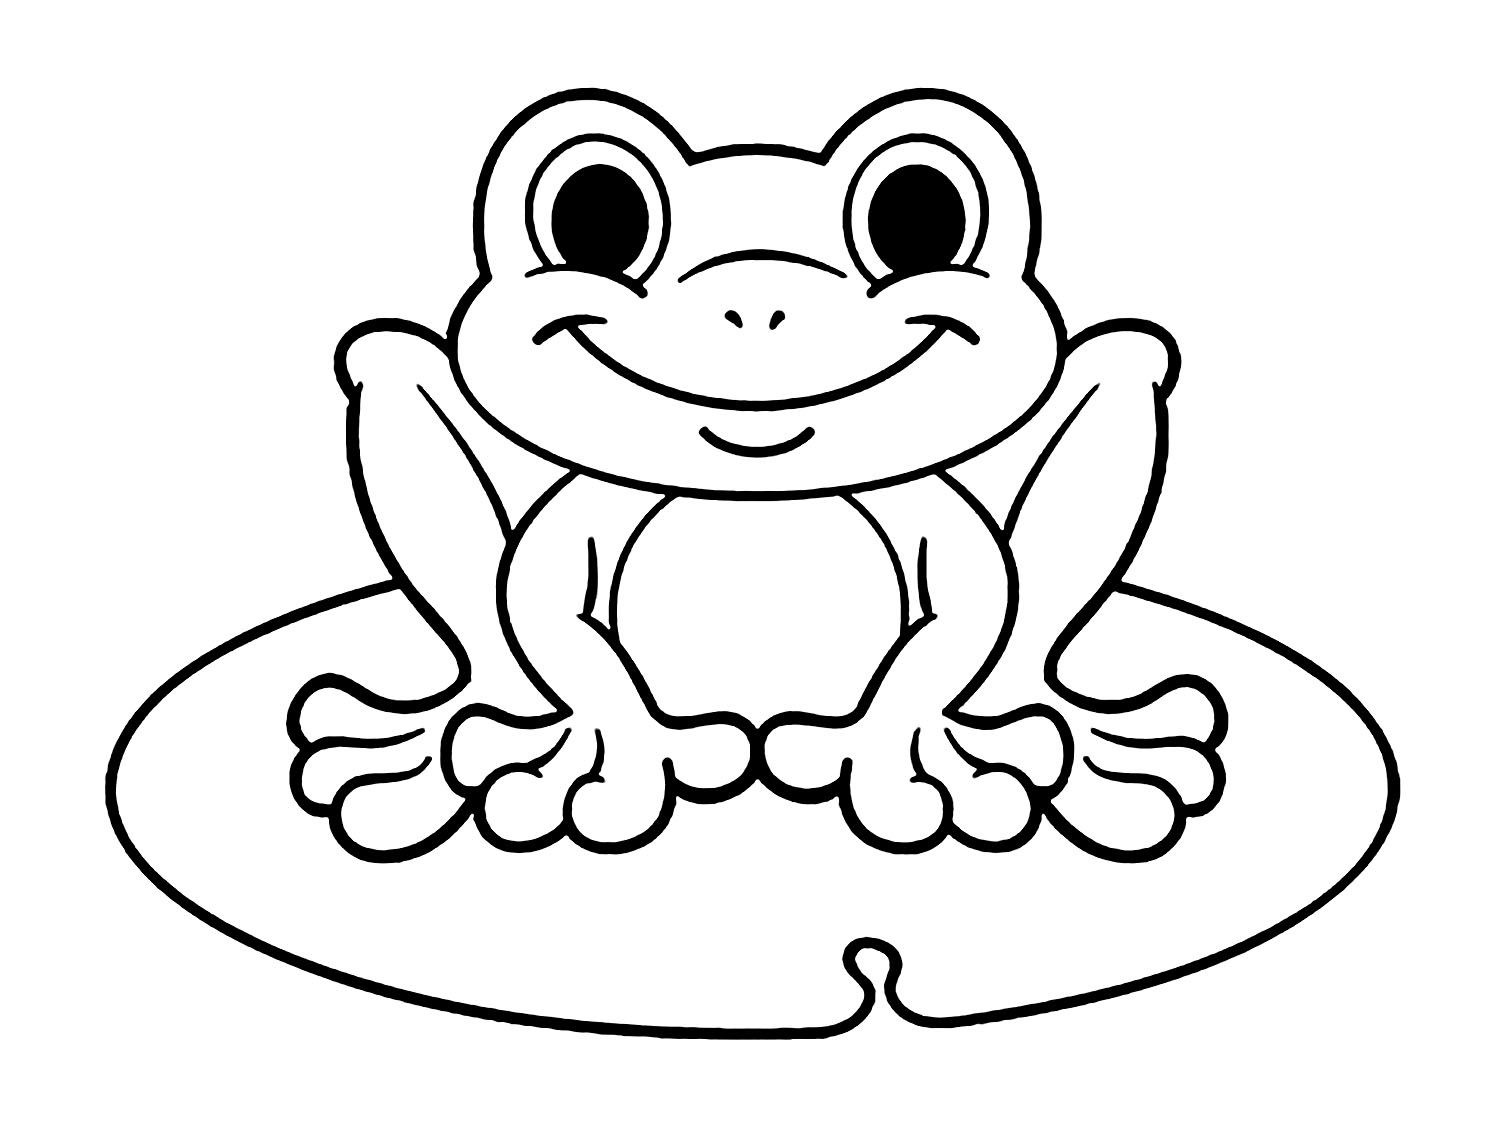 Beautiful Frogs coloring page to print and color